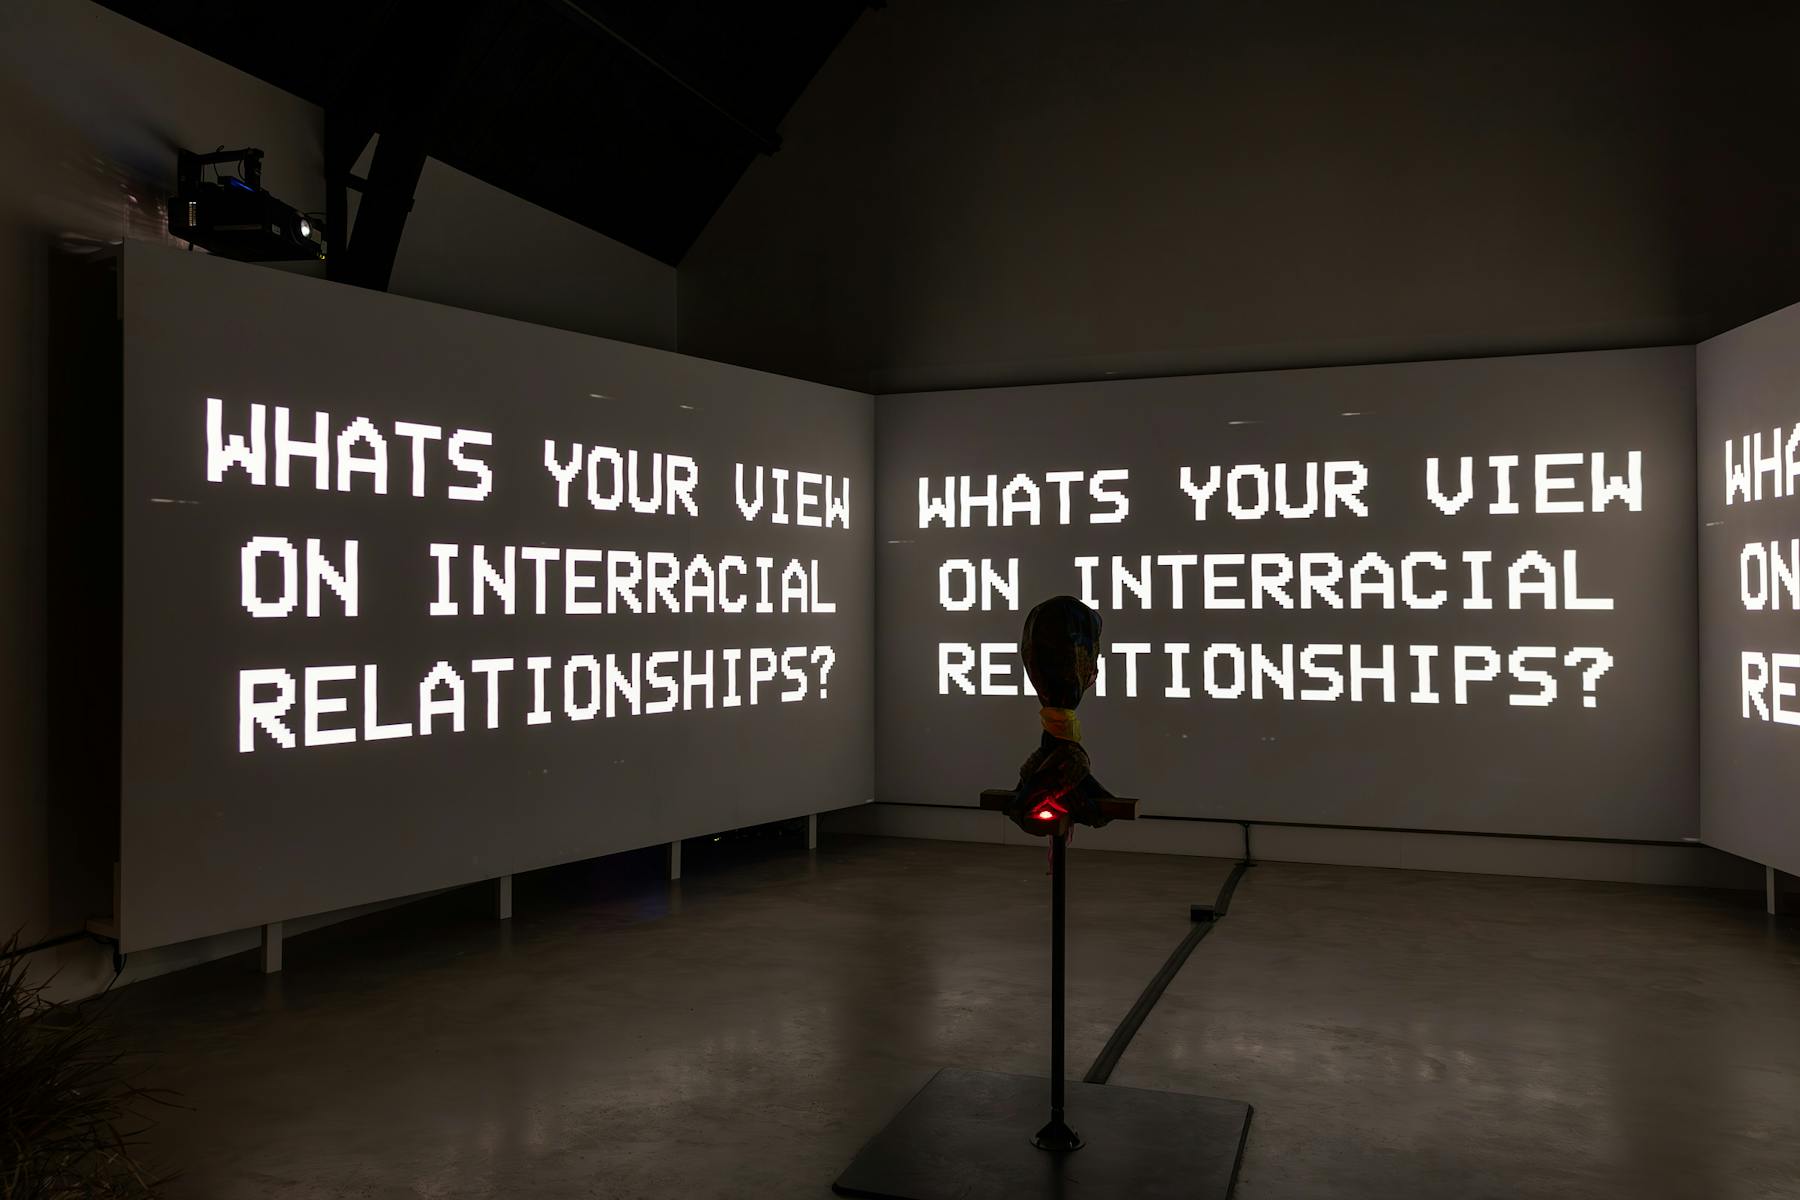 a photograph of three screens that are projected with black and white text. There is text that reads 'WHATS YOUR VIEW ON INTERRACIAL RELATIONSHIPS'. In the foreground there is a hooded object on a stand. 